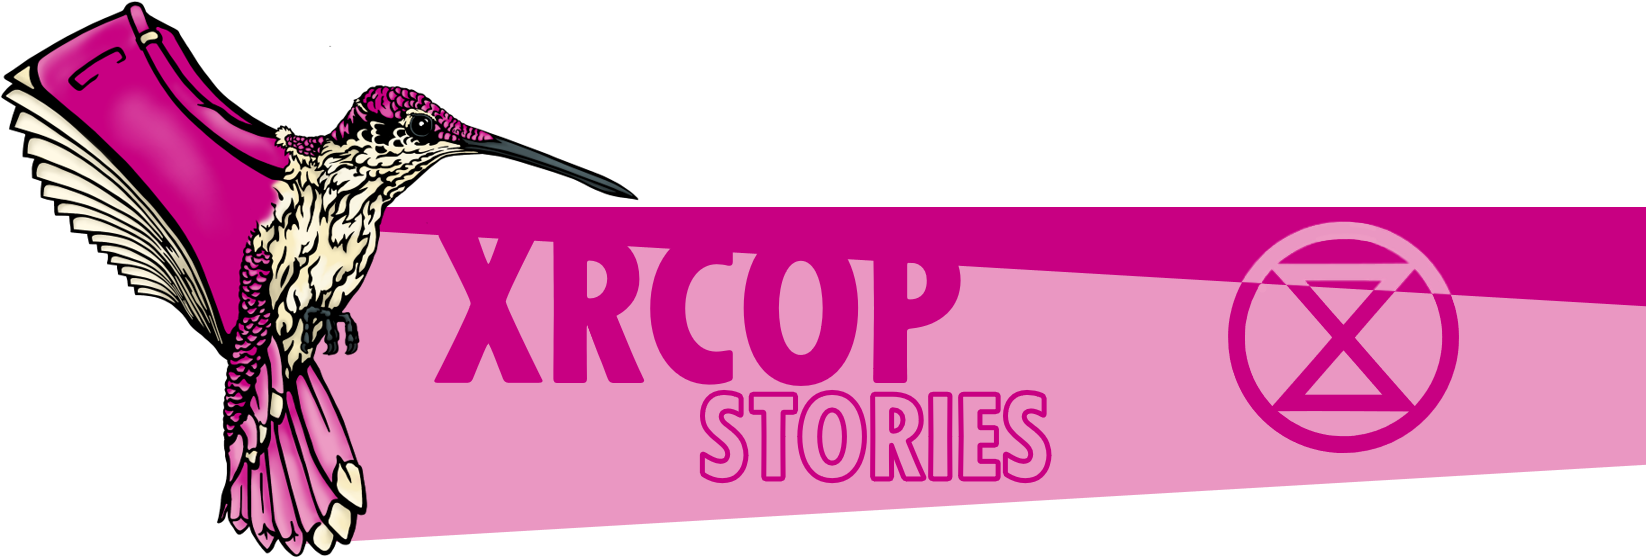 image for article xrcop: Rebels build relationships during XR COP's global conversations